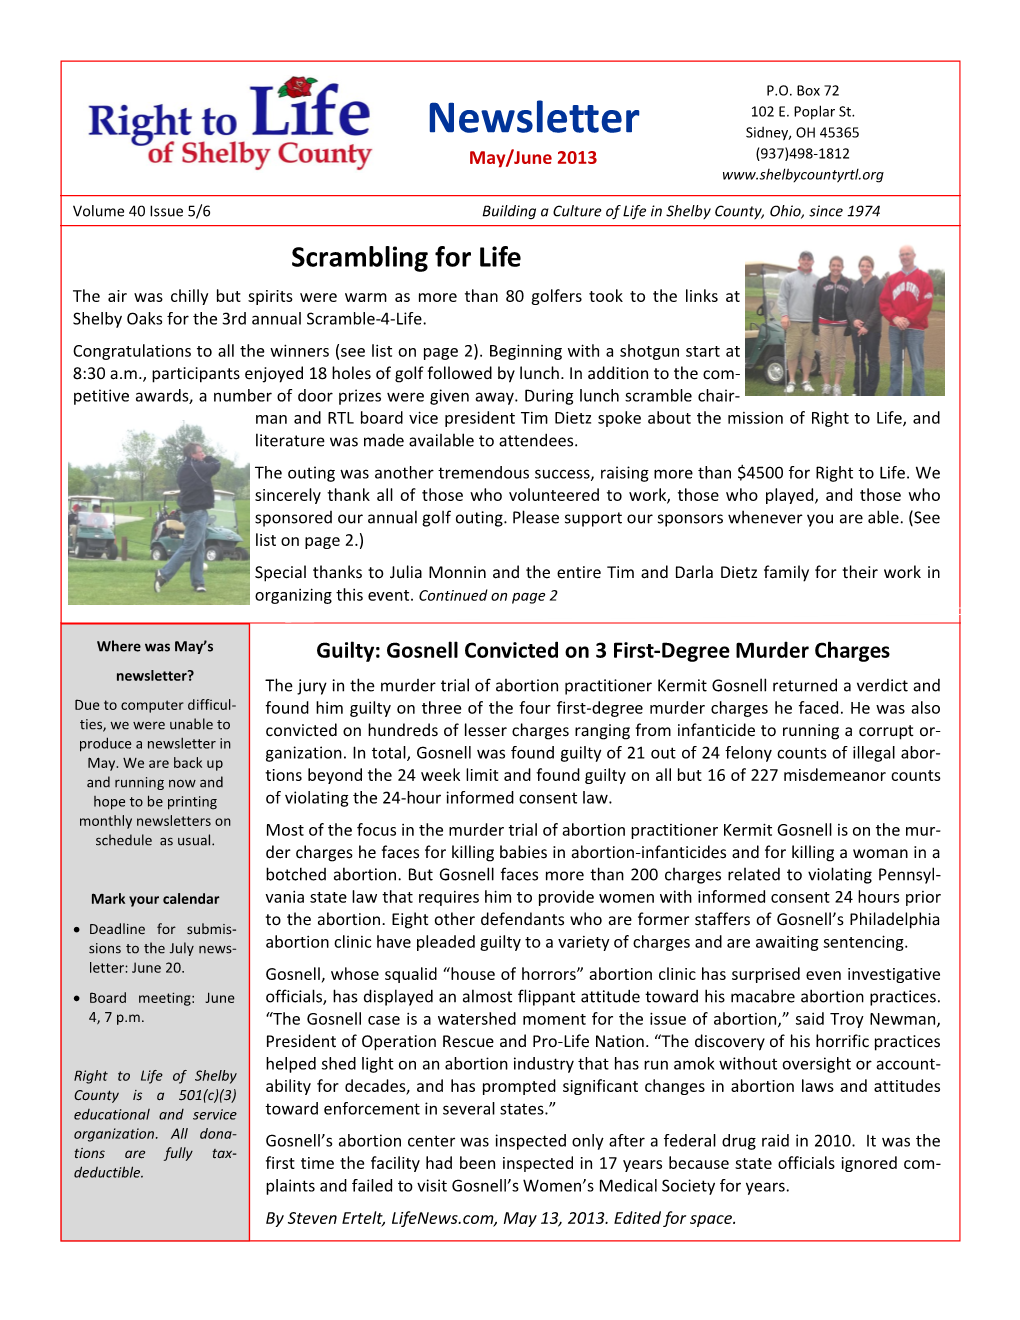 Newsletter Sidney, OH 45365 May/June 2013 (937)498-1812